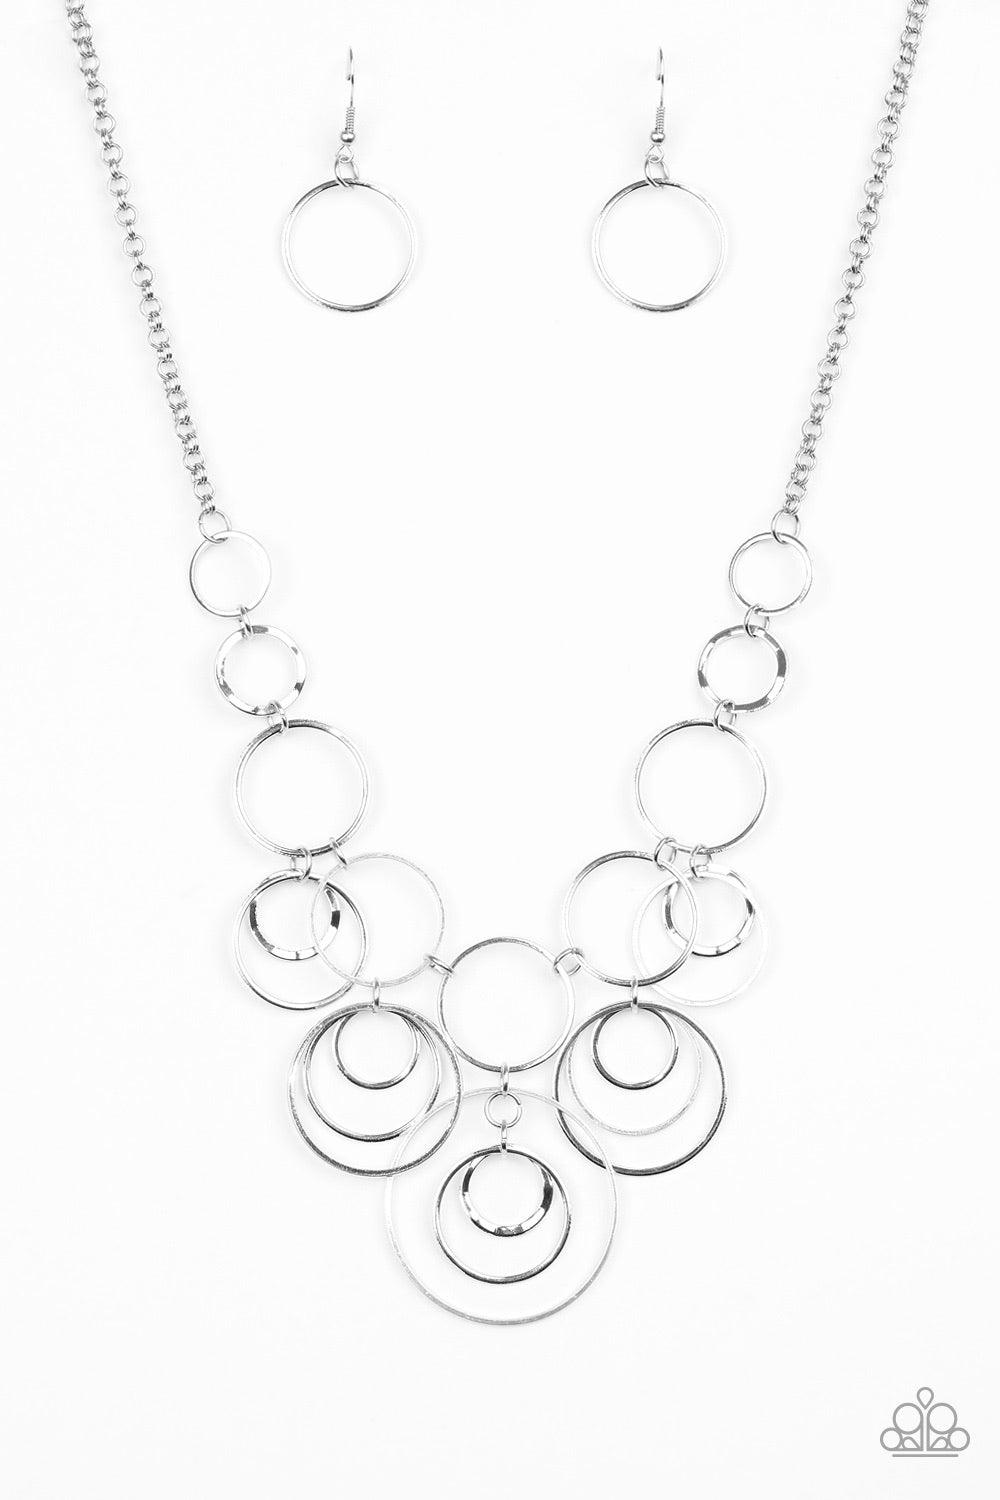 Paparazzi Accessories Break The Cycle - Silver Featuring smooth and delicately hammered finishes, mismatched silver hoops connect below the collar for a bold industrial look. Features an adjustable clasp closure. Jewelry